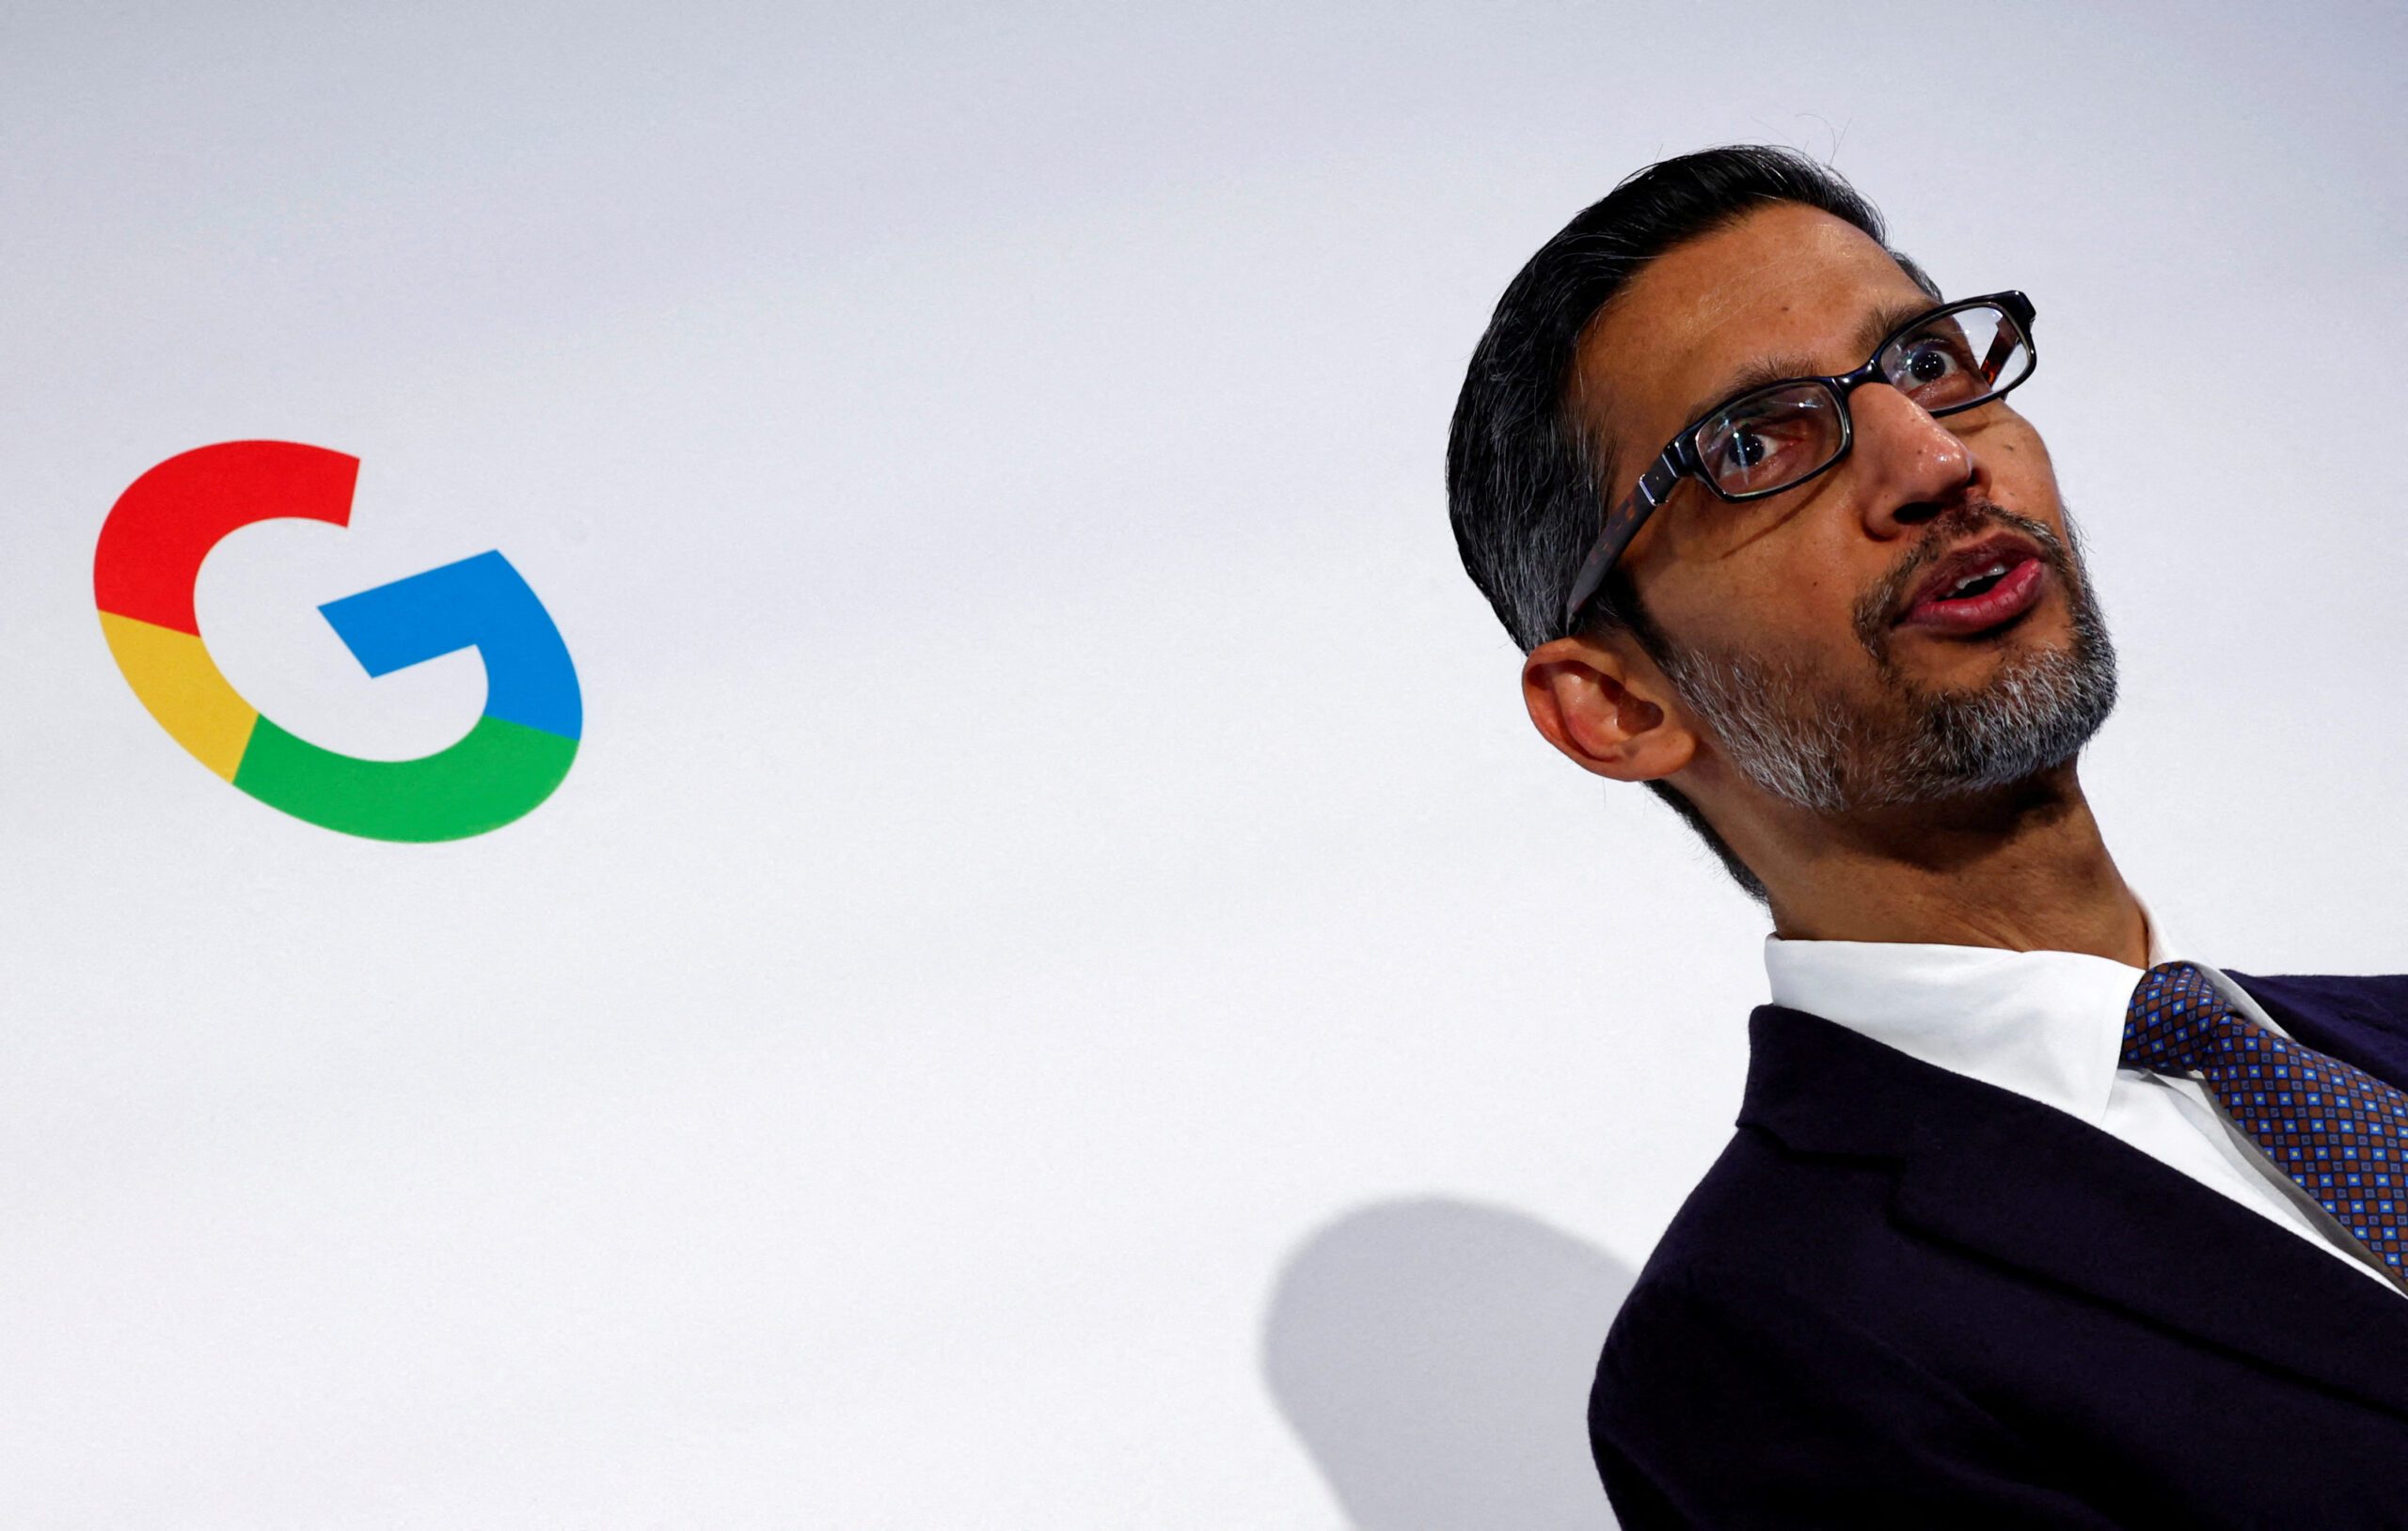 Google to launch anti-misinformation campaign ahead of EU elections